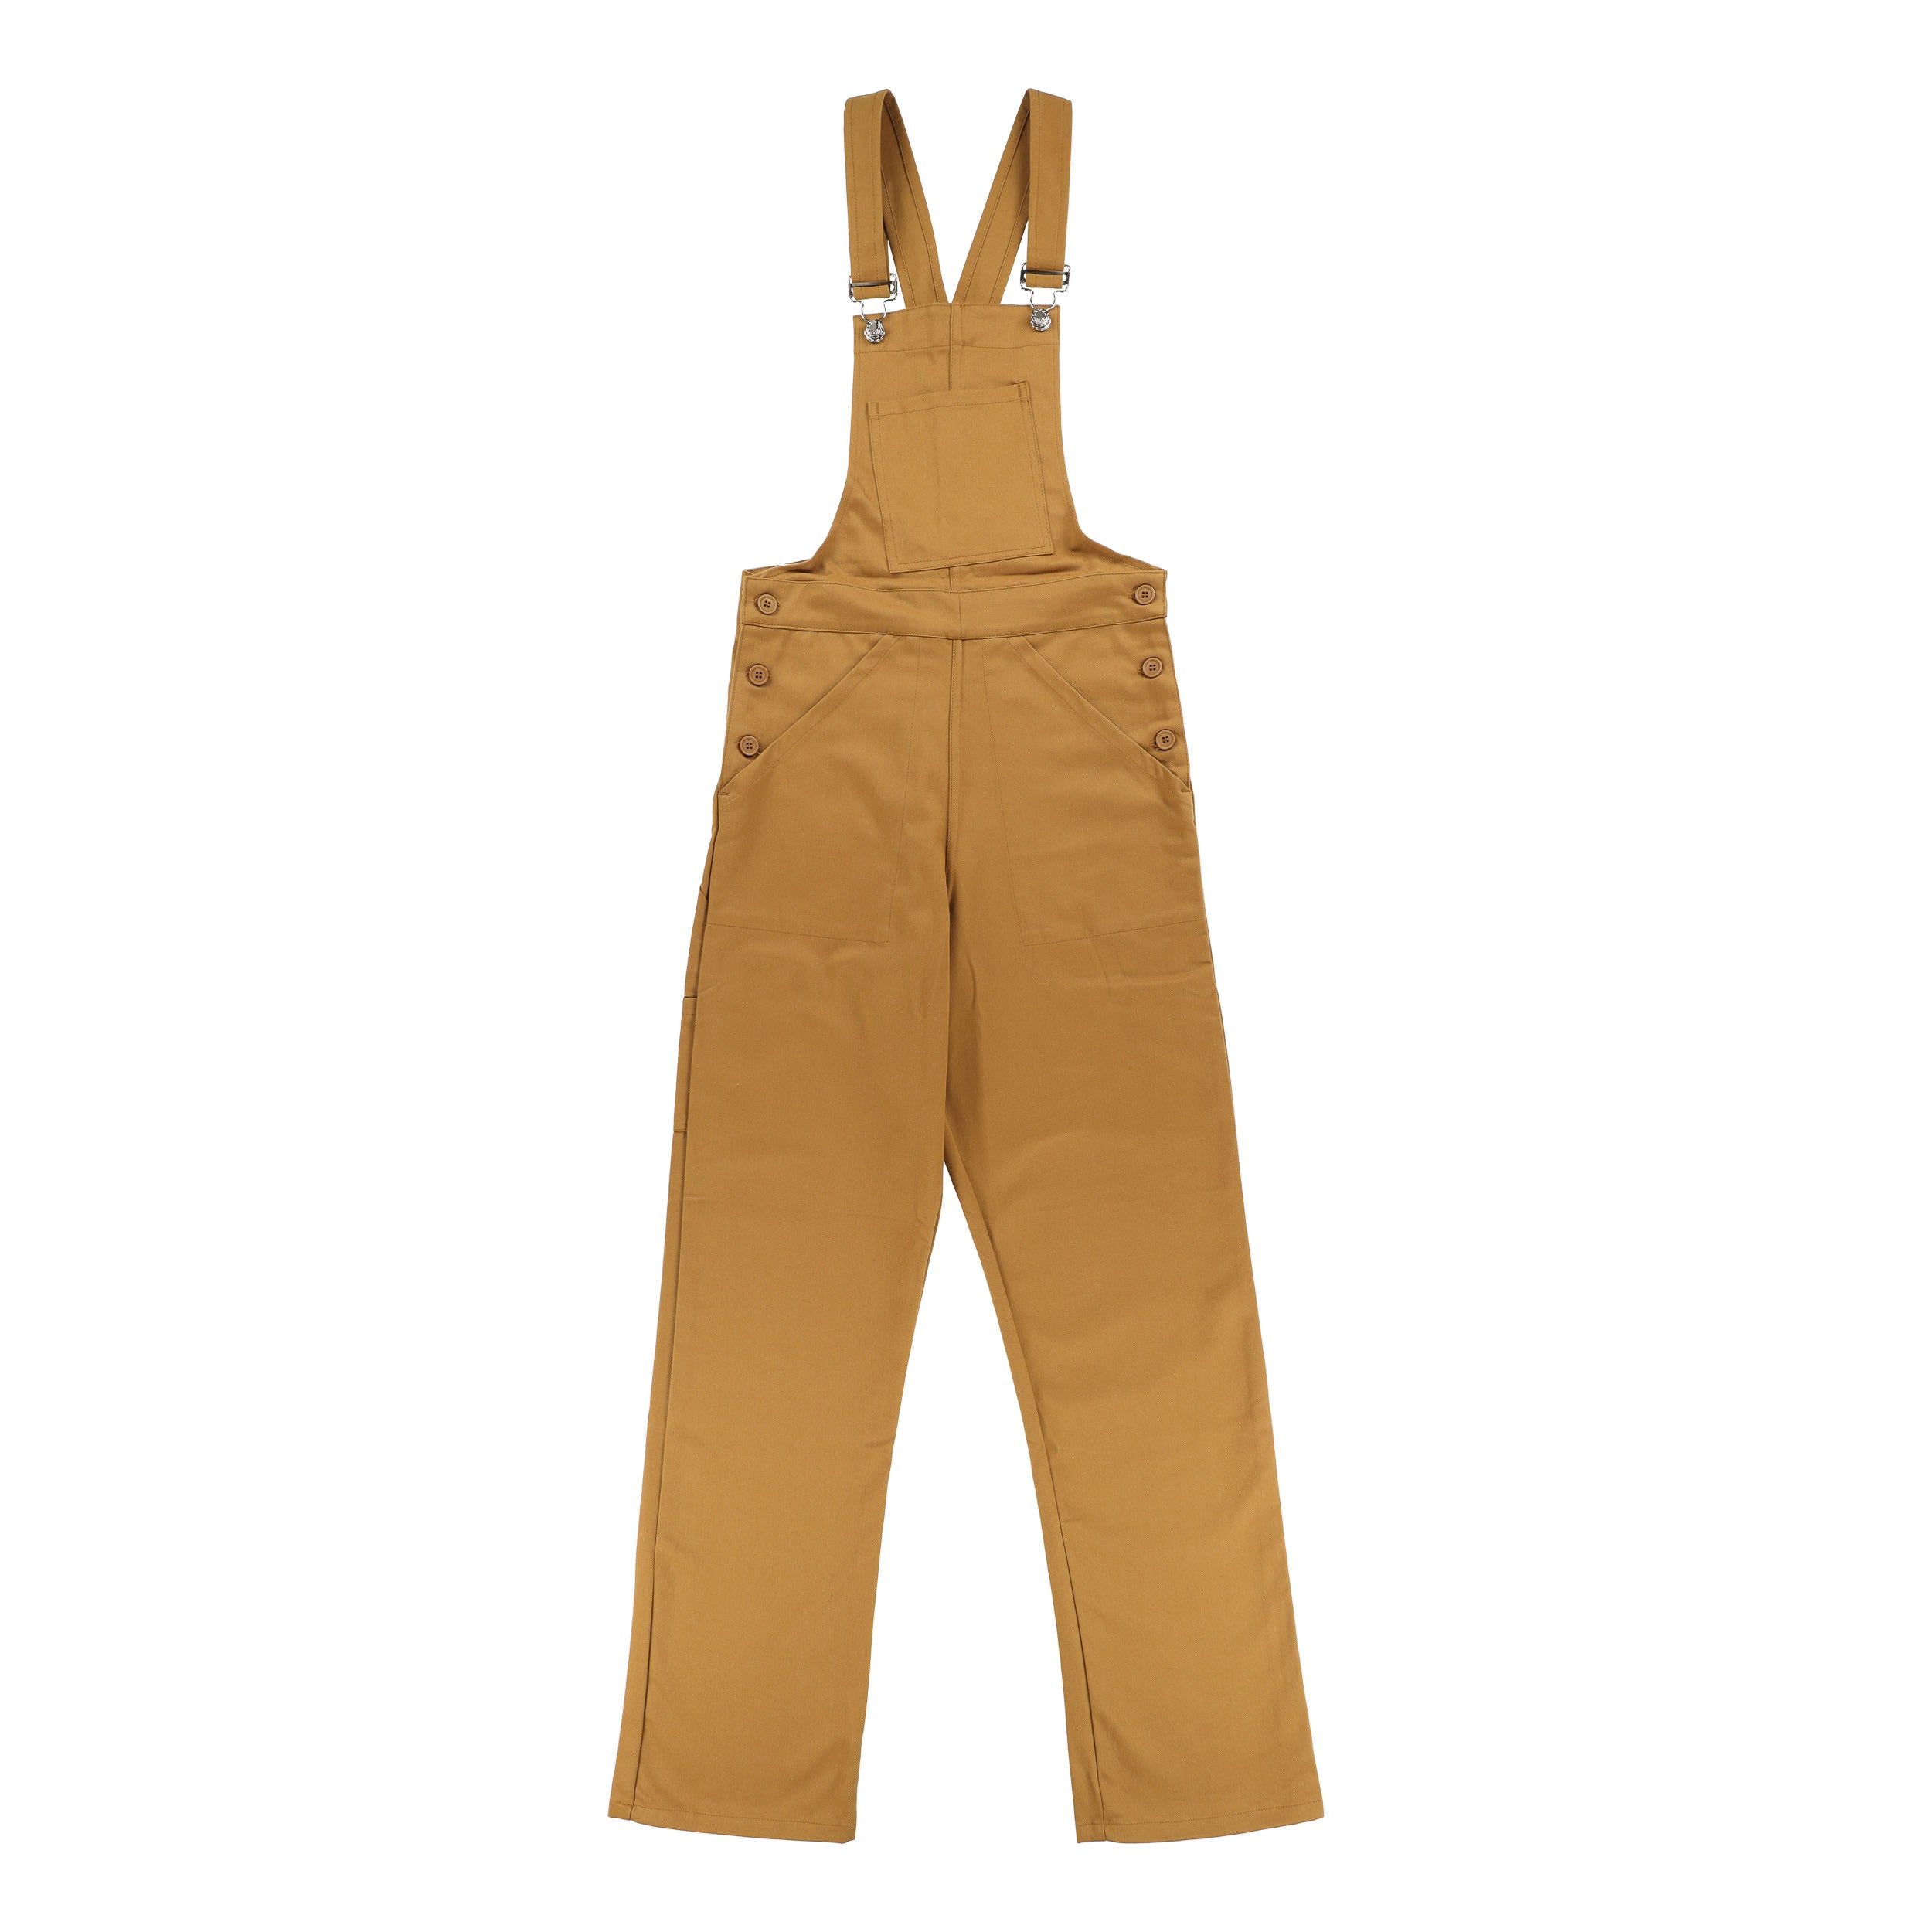 Carrier Company Women's Dungarees in Tan